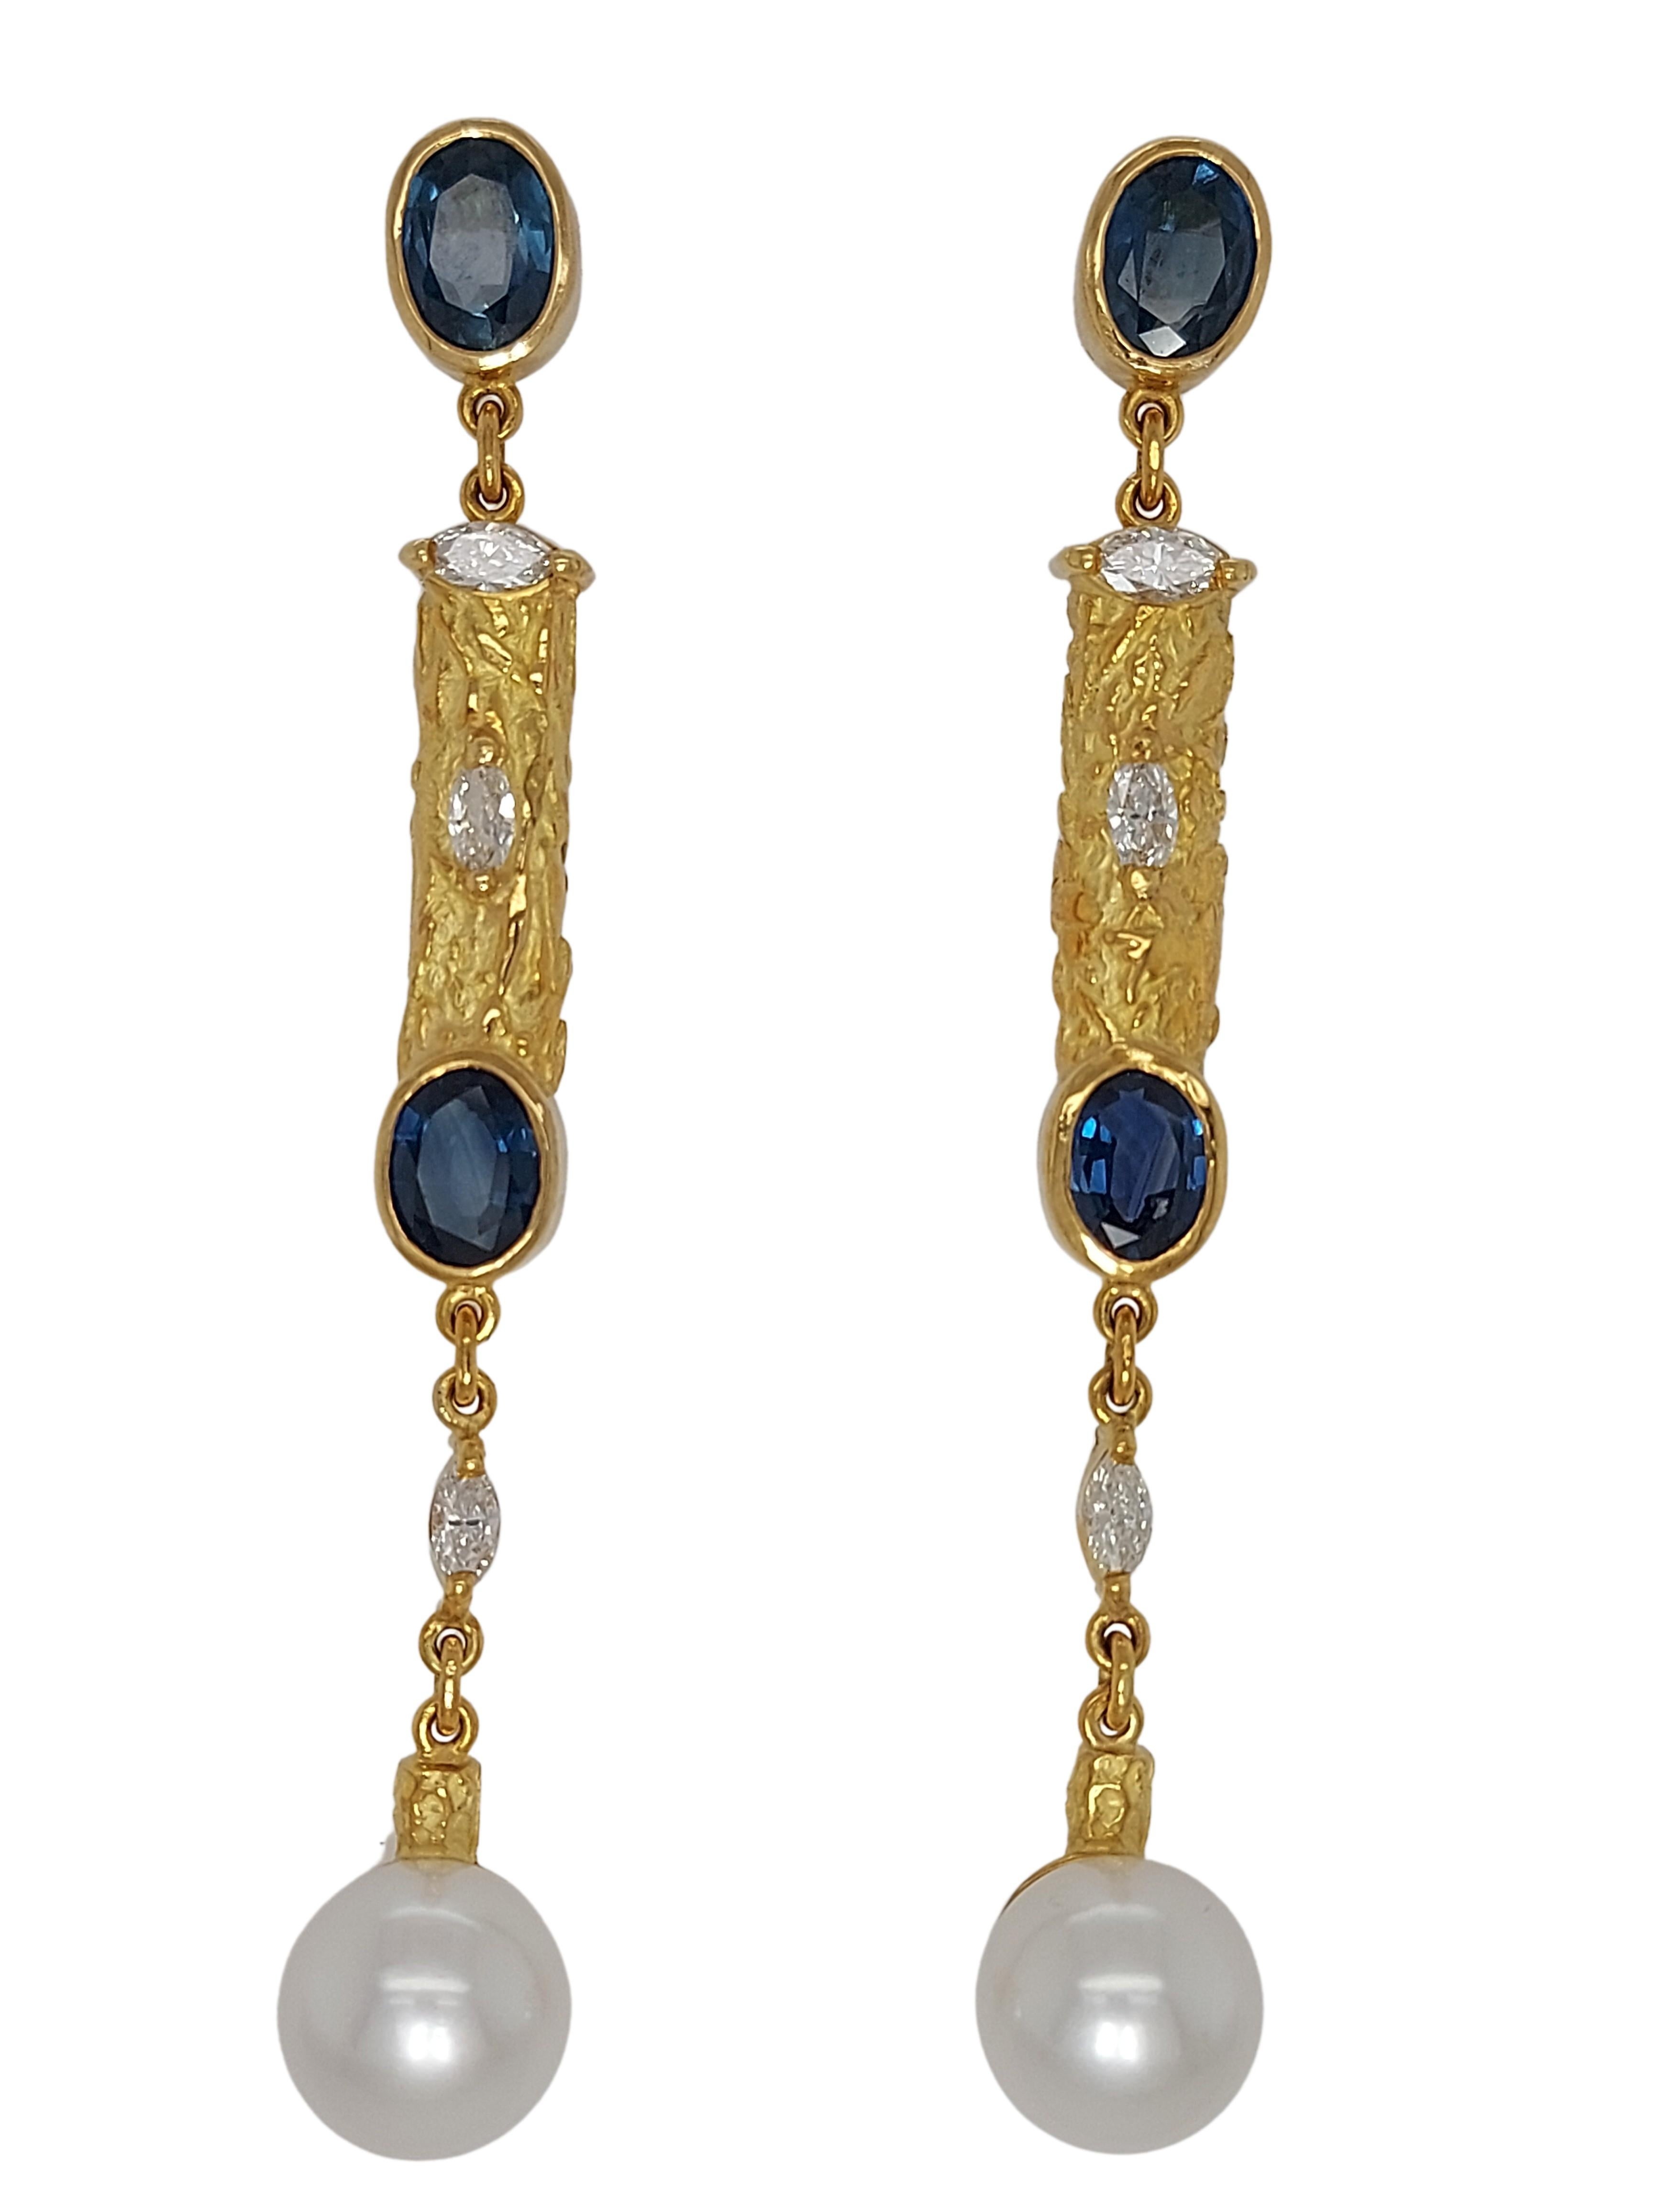 J.P De Saedeleer 18 Kt gold Earrings with 5.84 Ct Sapphires, Diamonds, Pearl In New Condition For Sale In Antwerp, BE